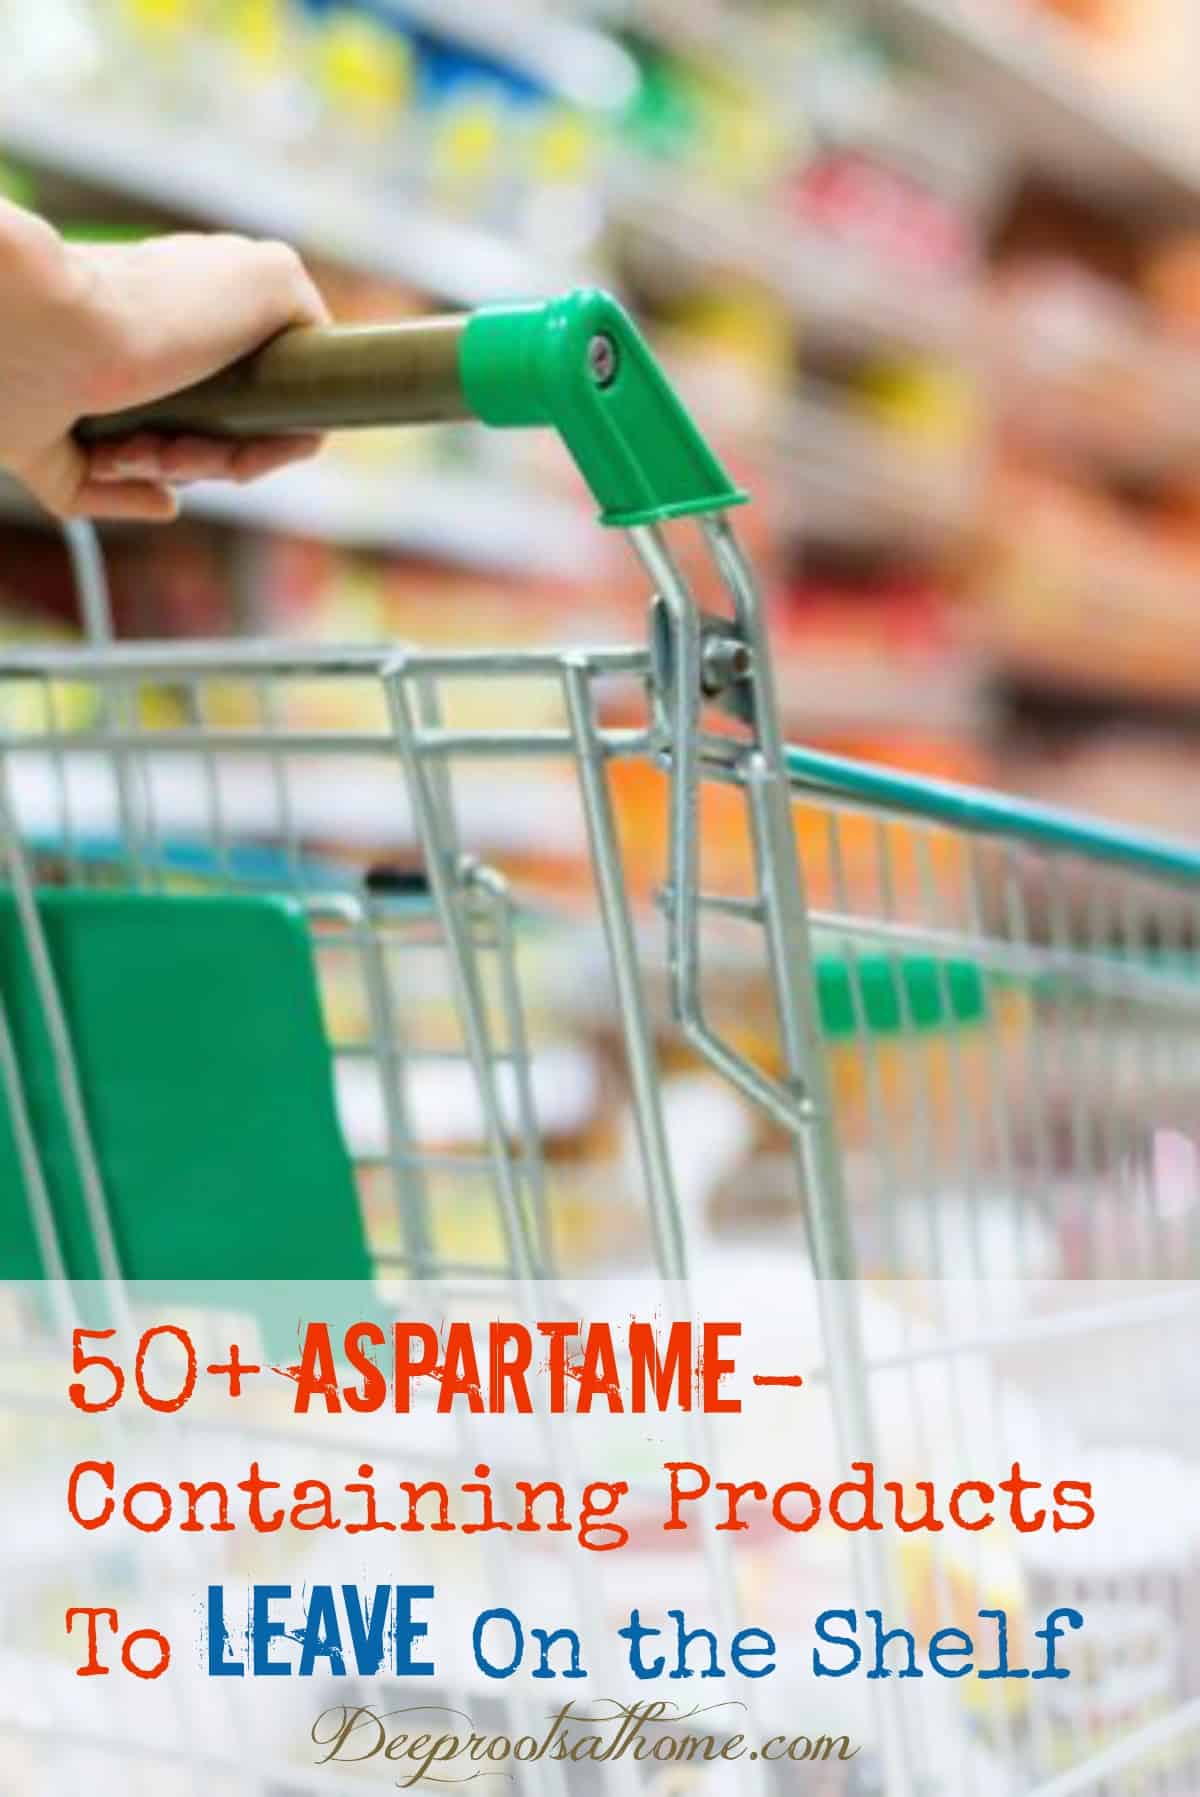 Kids Vitamins & 50 Aspartame-Containing Products to Leave On the Shelf